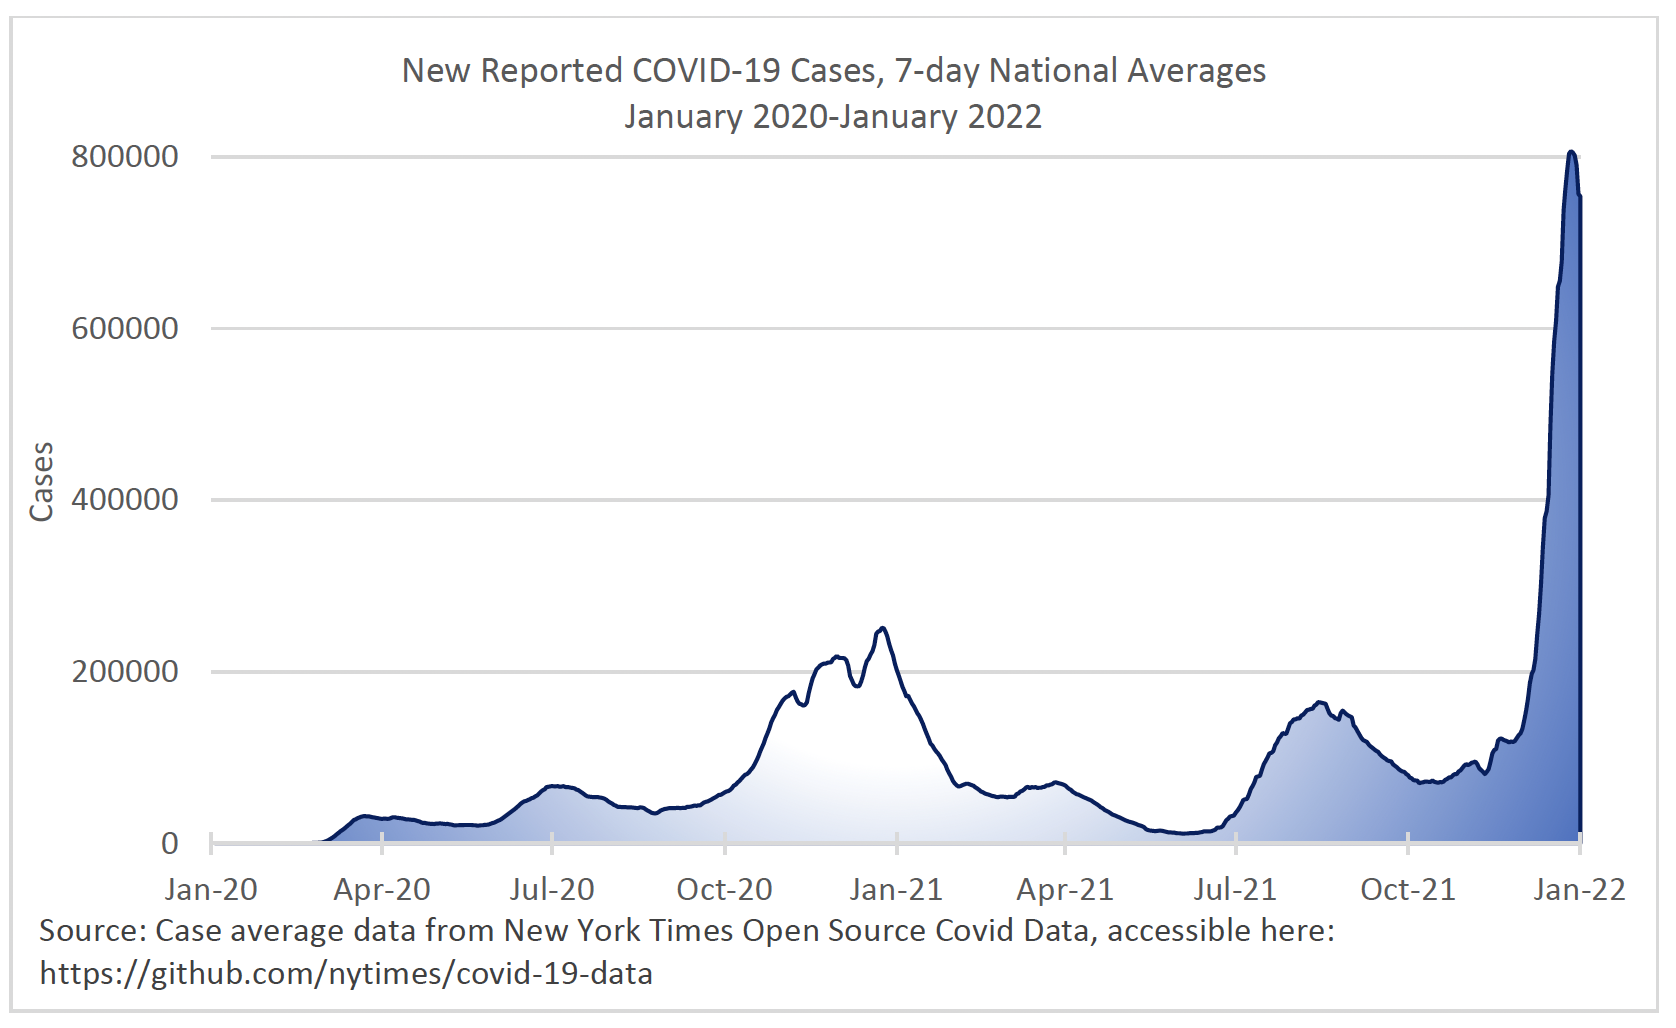 New reported COVID-19 cases, 7-day national averages, Jan. 2020-Jan. 2022